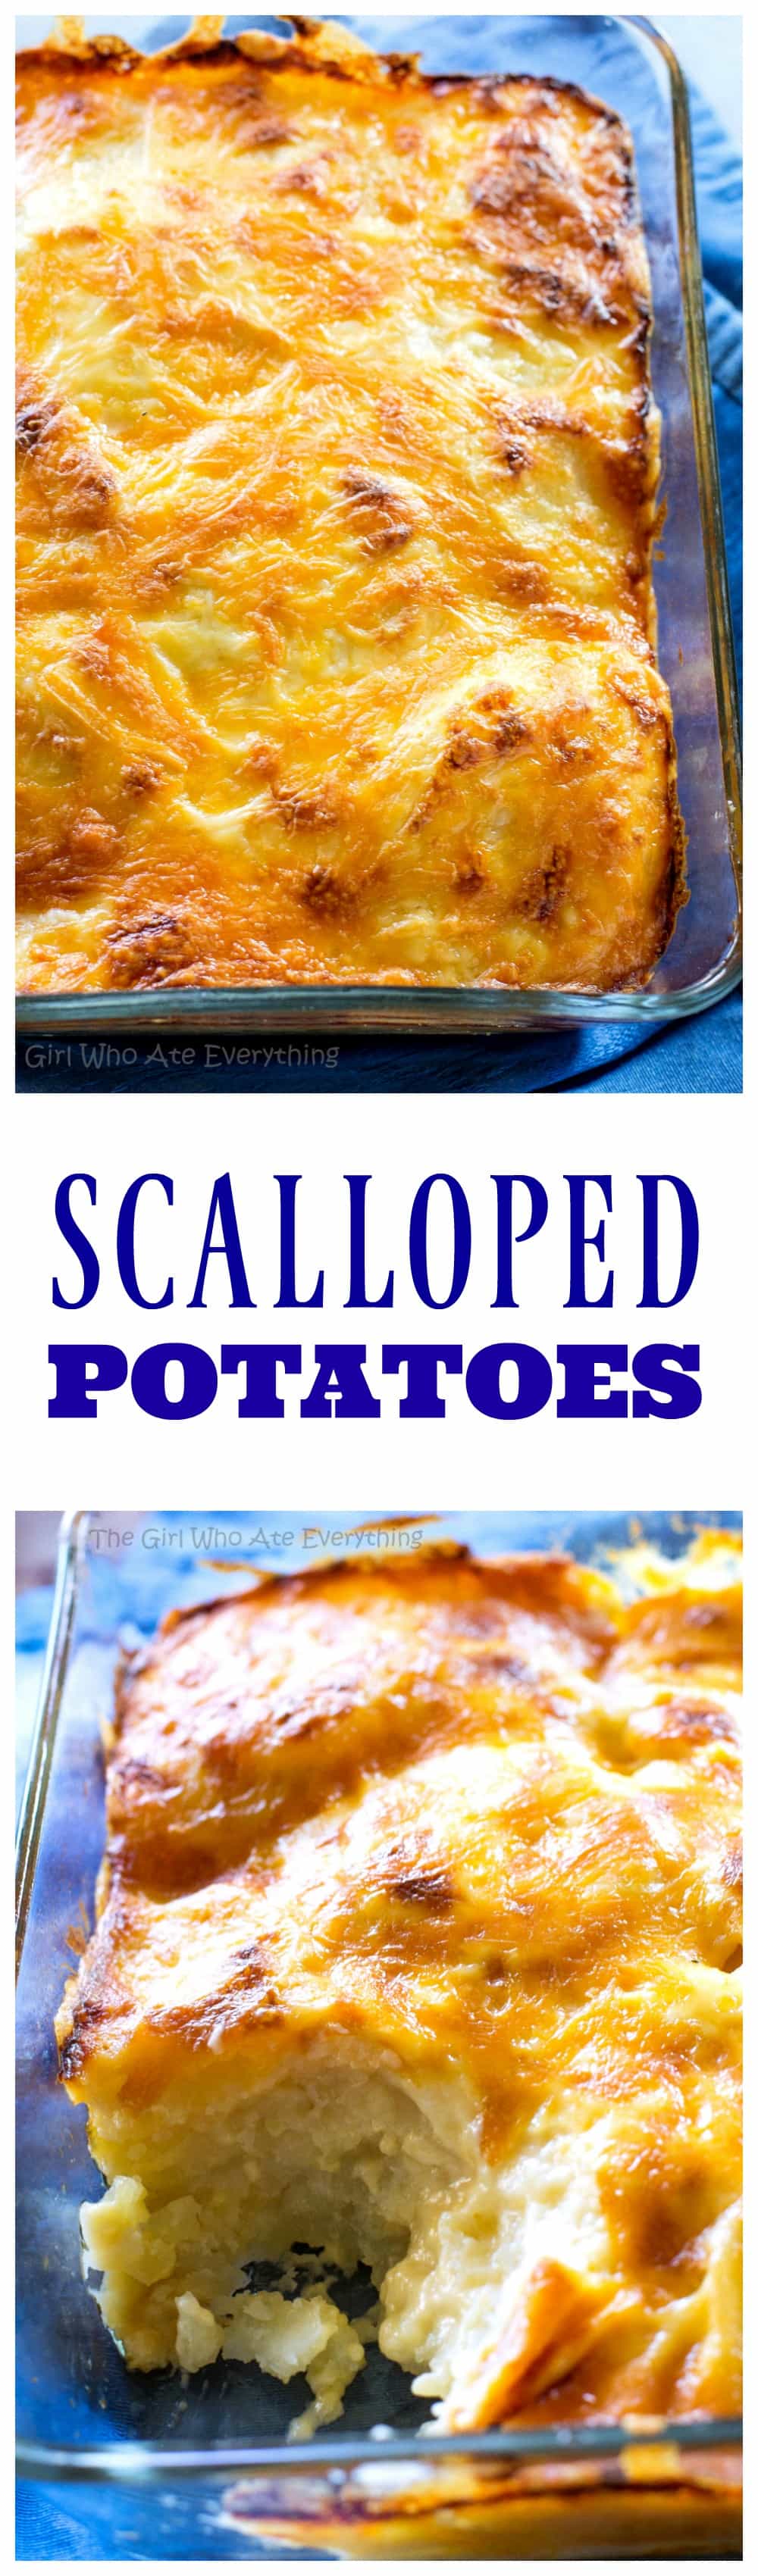 Scalloped Potatoes - a classic dish with potatoes, cheesy sauce, and baked until perfection! #scalloped #potatoes #recipe #cheese #casserole